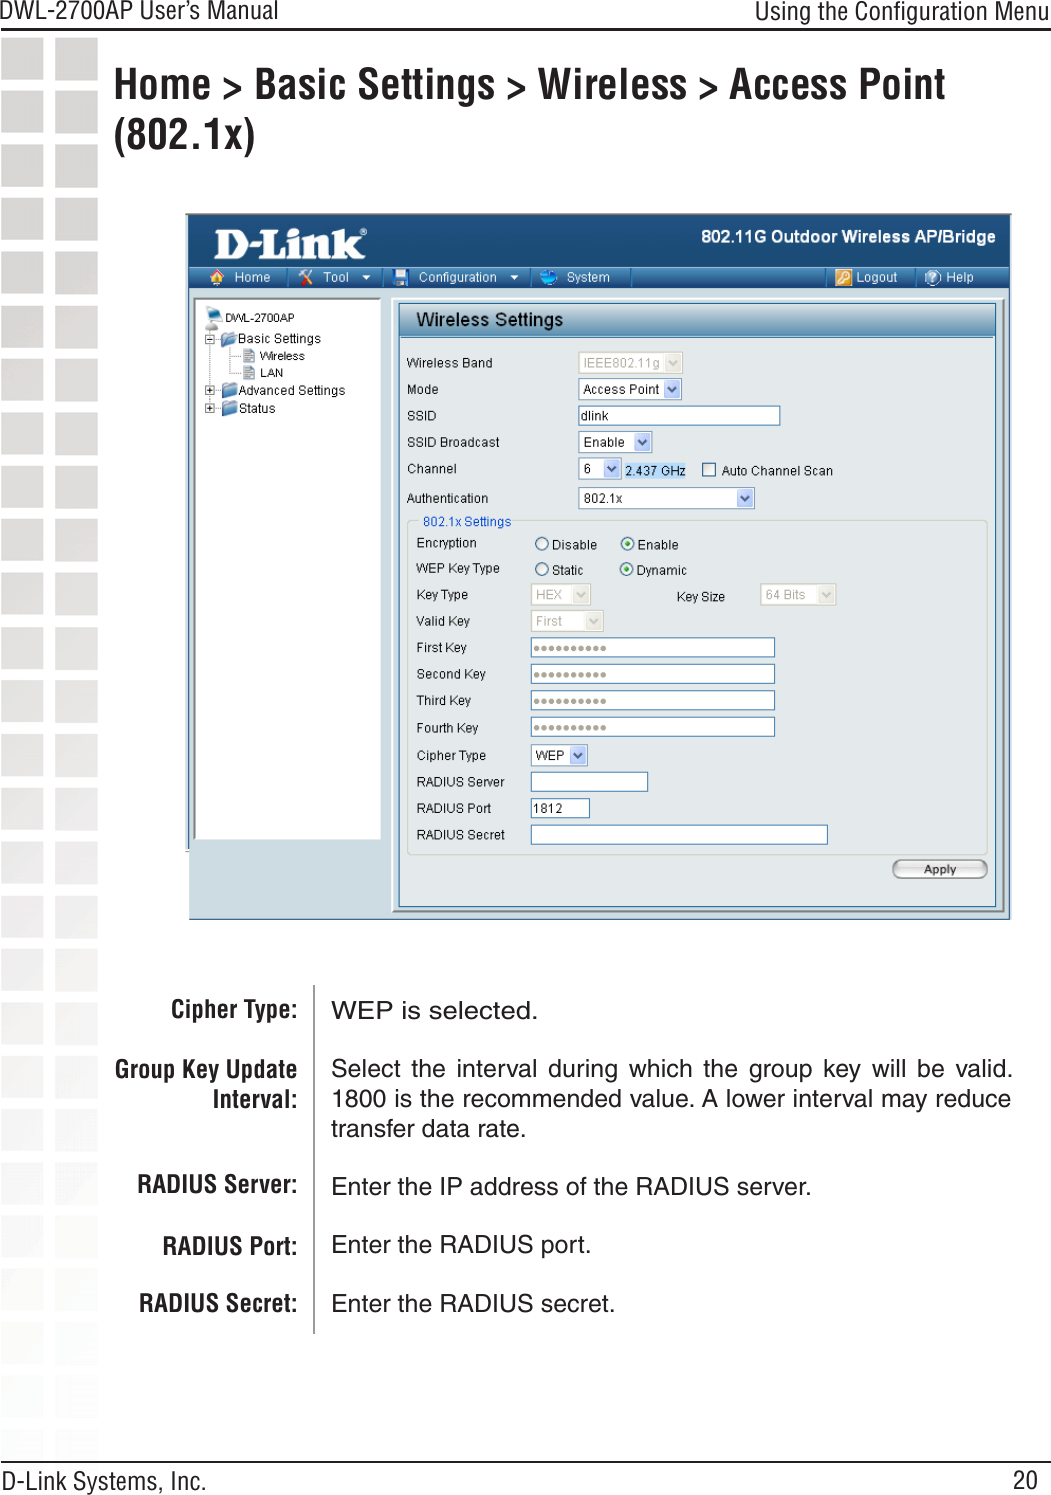 20DWL-2700AP User’s Manual D-Link Systems, Inc.Using the Conﬁguration MenuHome &gt; Basic Settings &gt; Wireless &gt; Access Point (802.1x) WEP is selected.Select  the  interval during  which  the  group  key  will  be  valid. 1800 is the recommended value. A lower interval may reduce transfer data rate.Enter the IP address of the RADIUS server.Enter the RADIUS port.Enter the RADIUS secret.Cipher Type:Group Key Update Interval: RADIUS Server:RADIUS Port:RADIUS Secret: